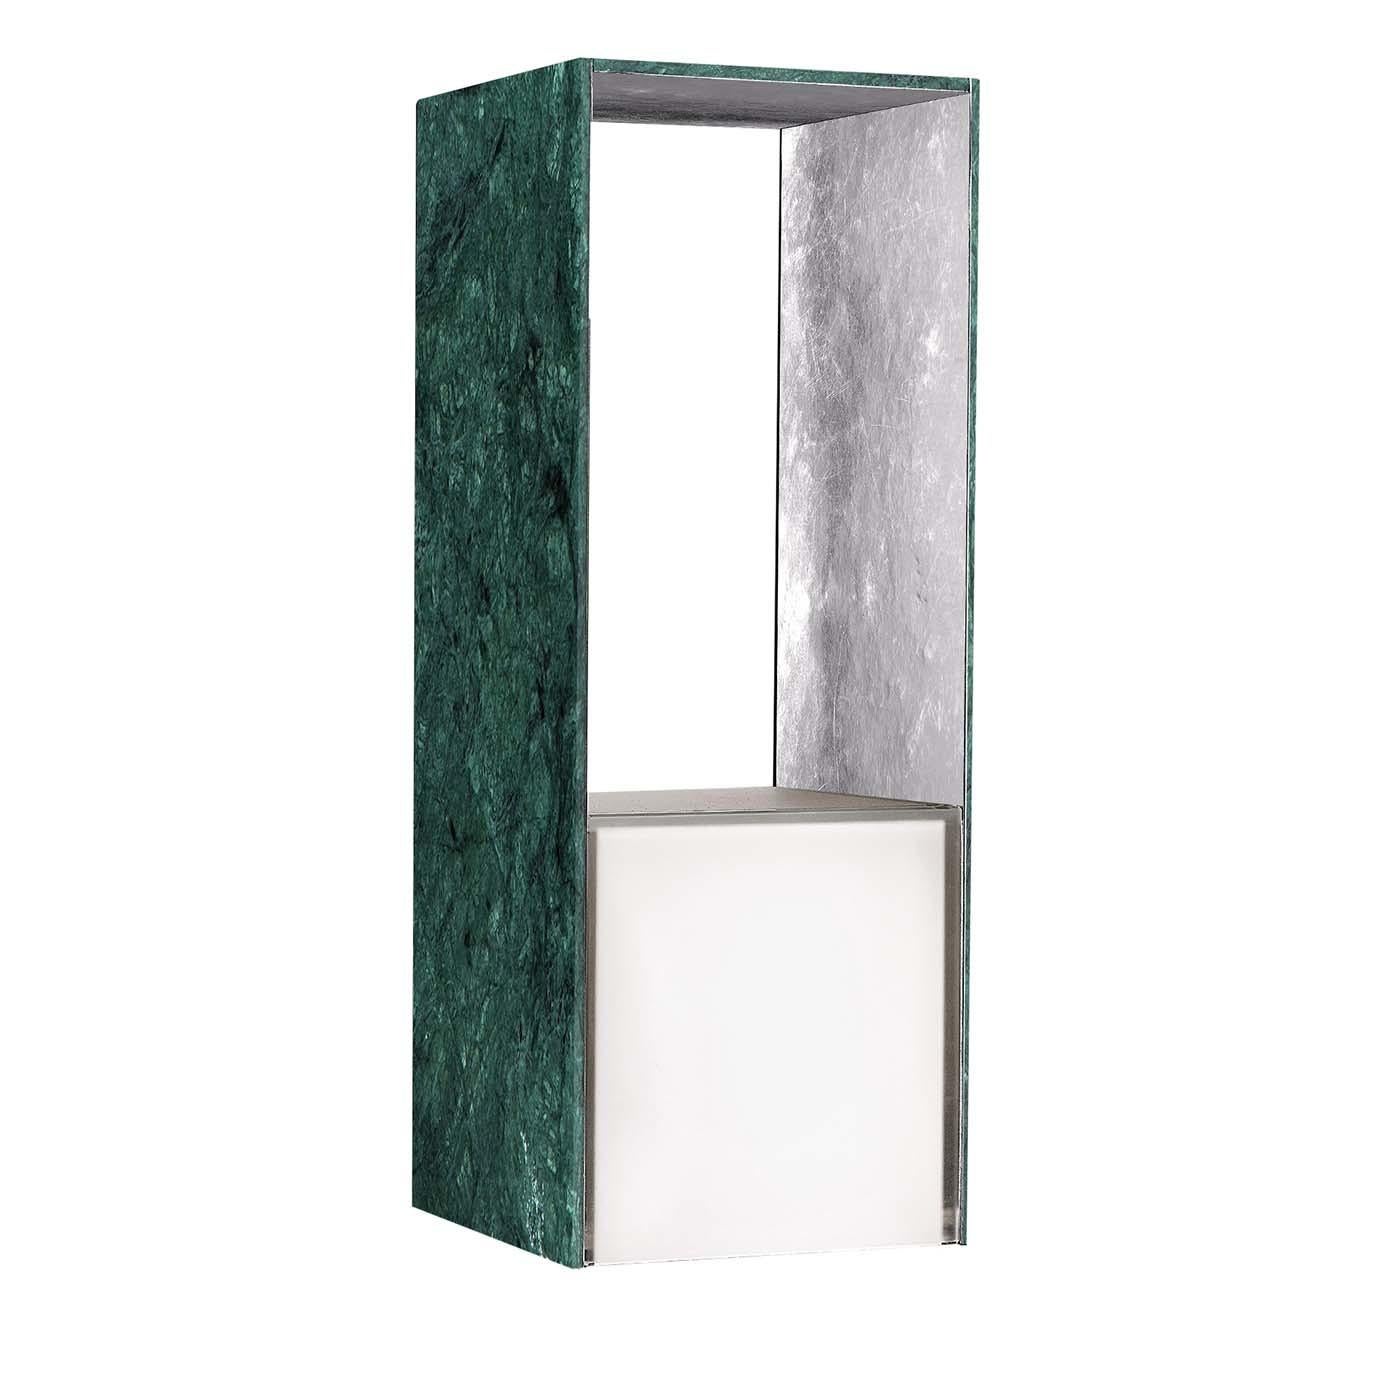 Italian Presence Table Lamp with Verde Guatemala and Silver